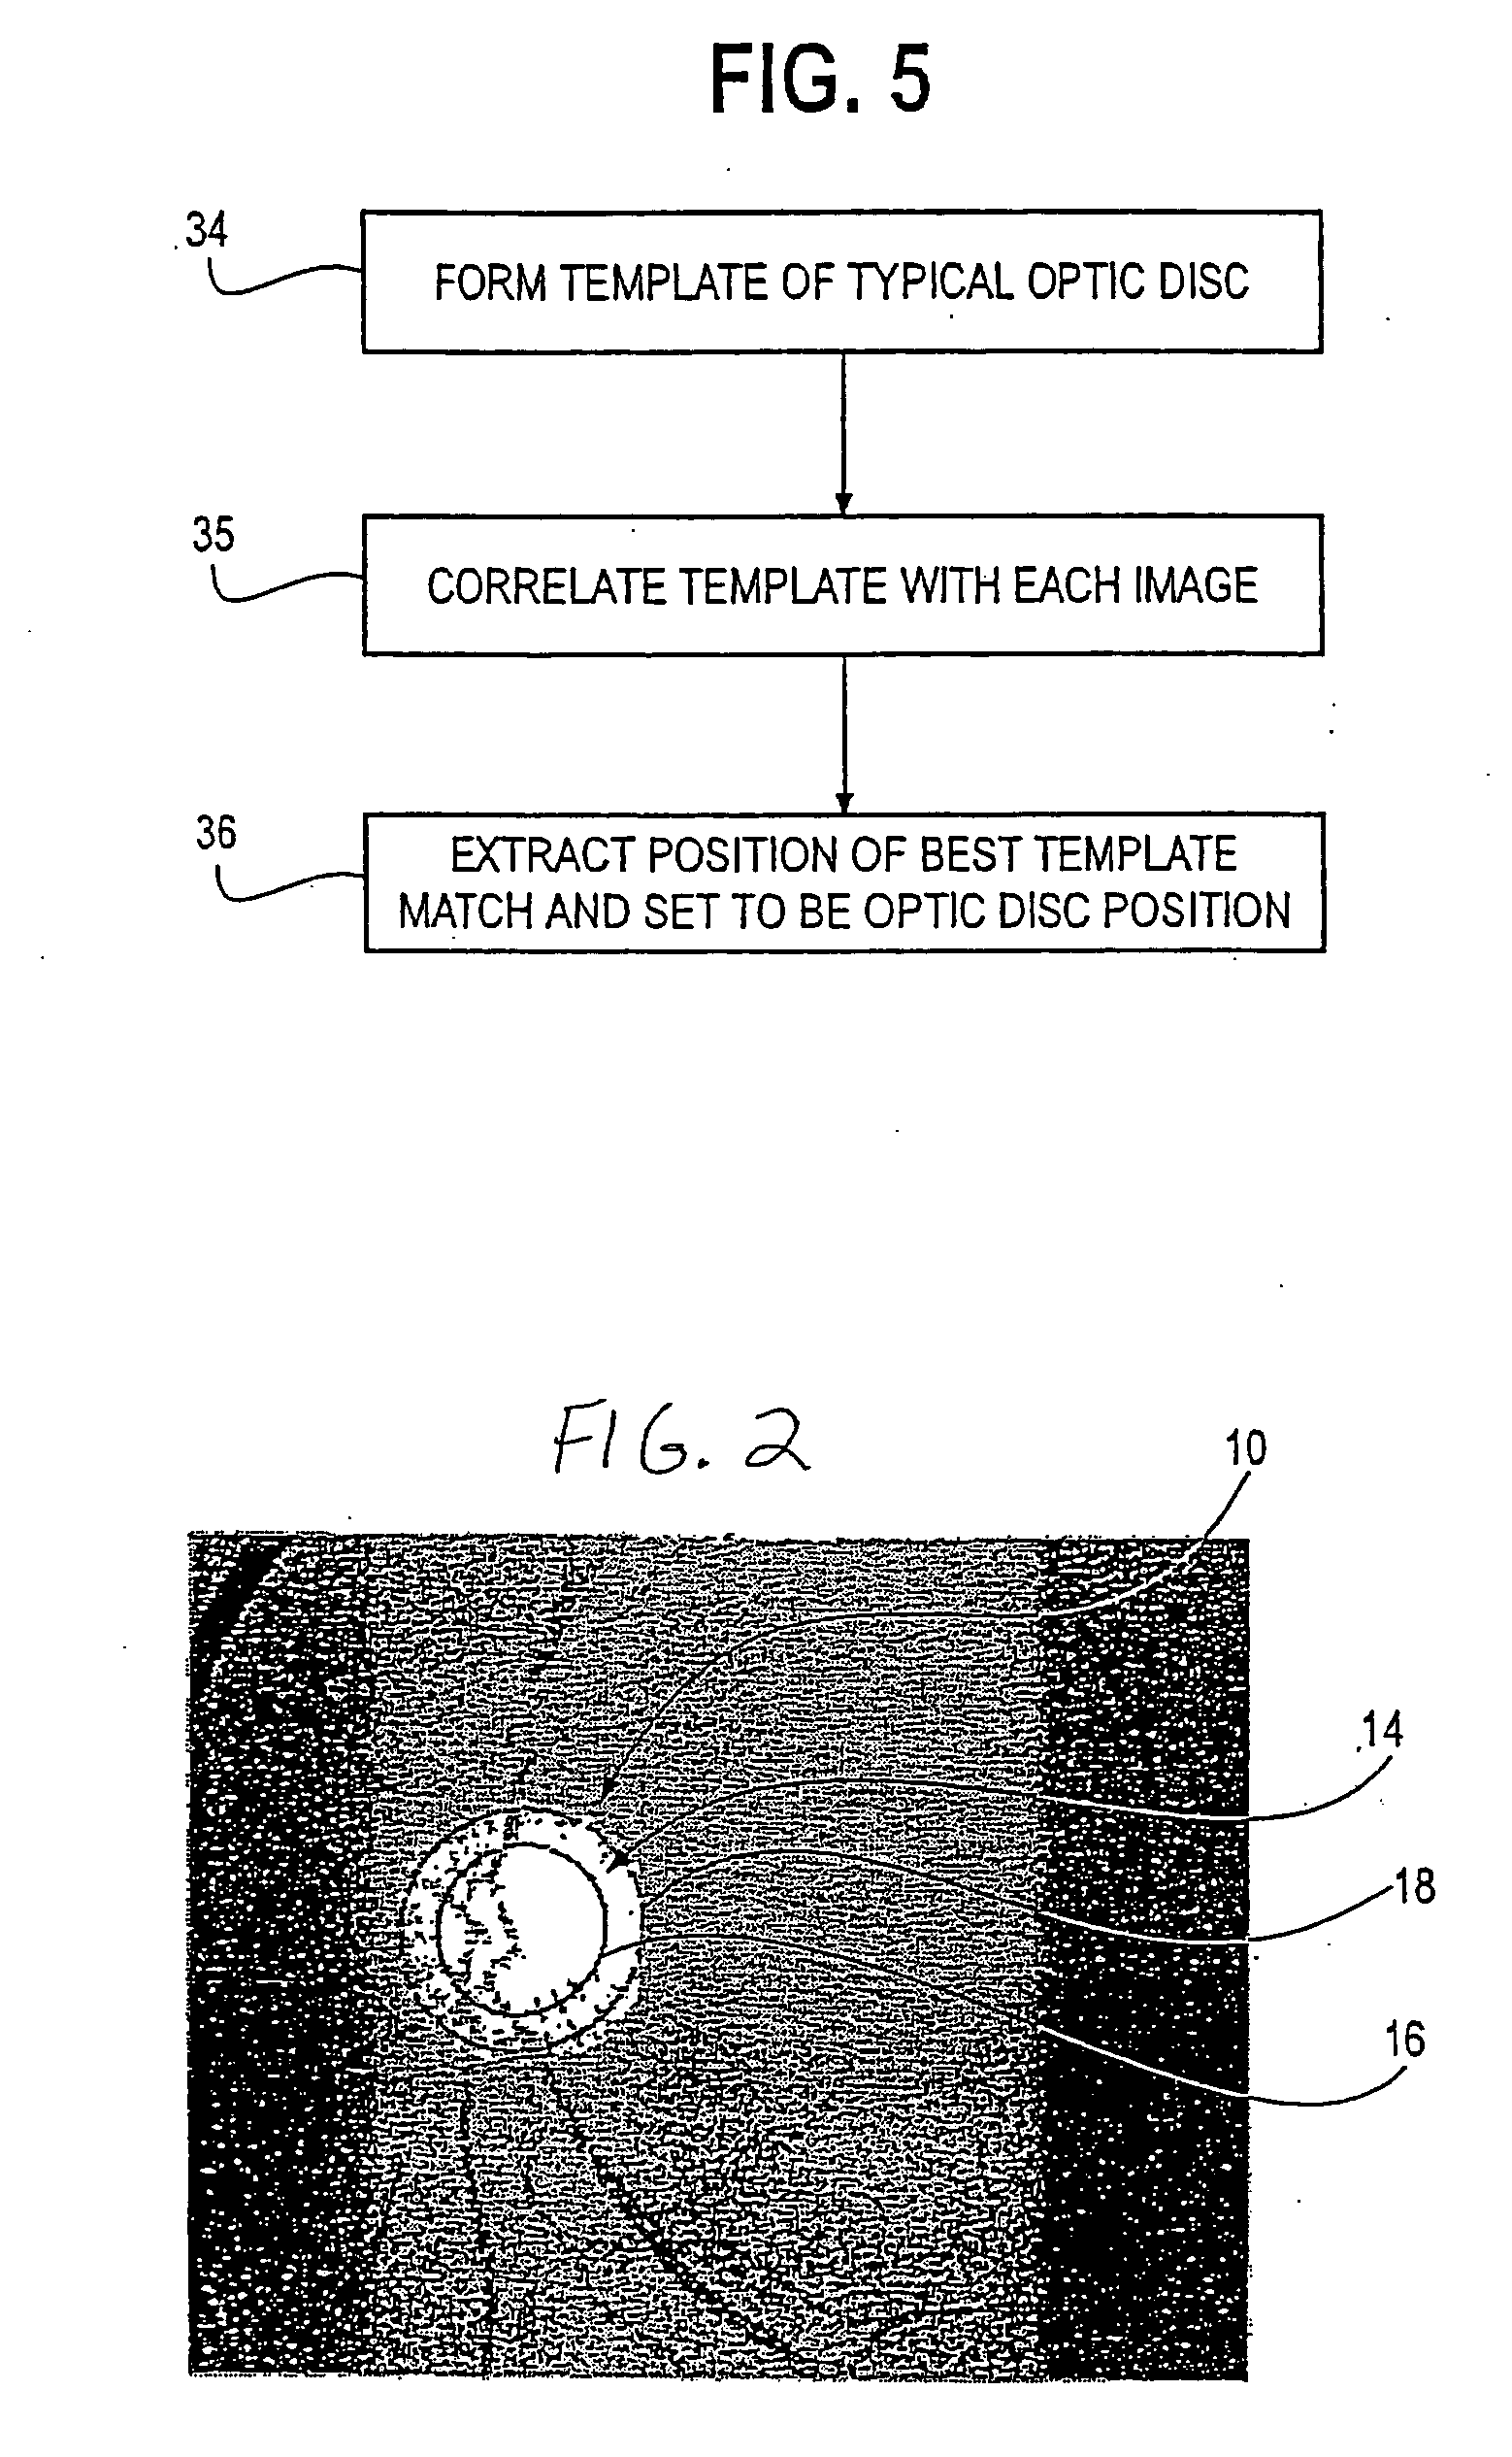 Method and system for automatically capturing an image of a retina